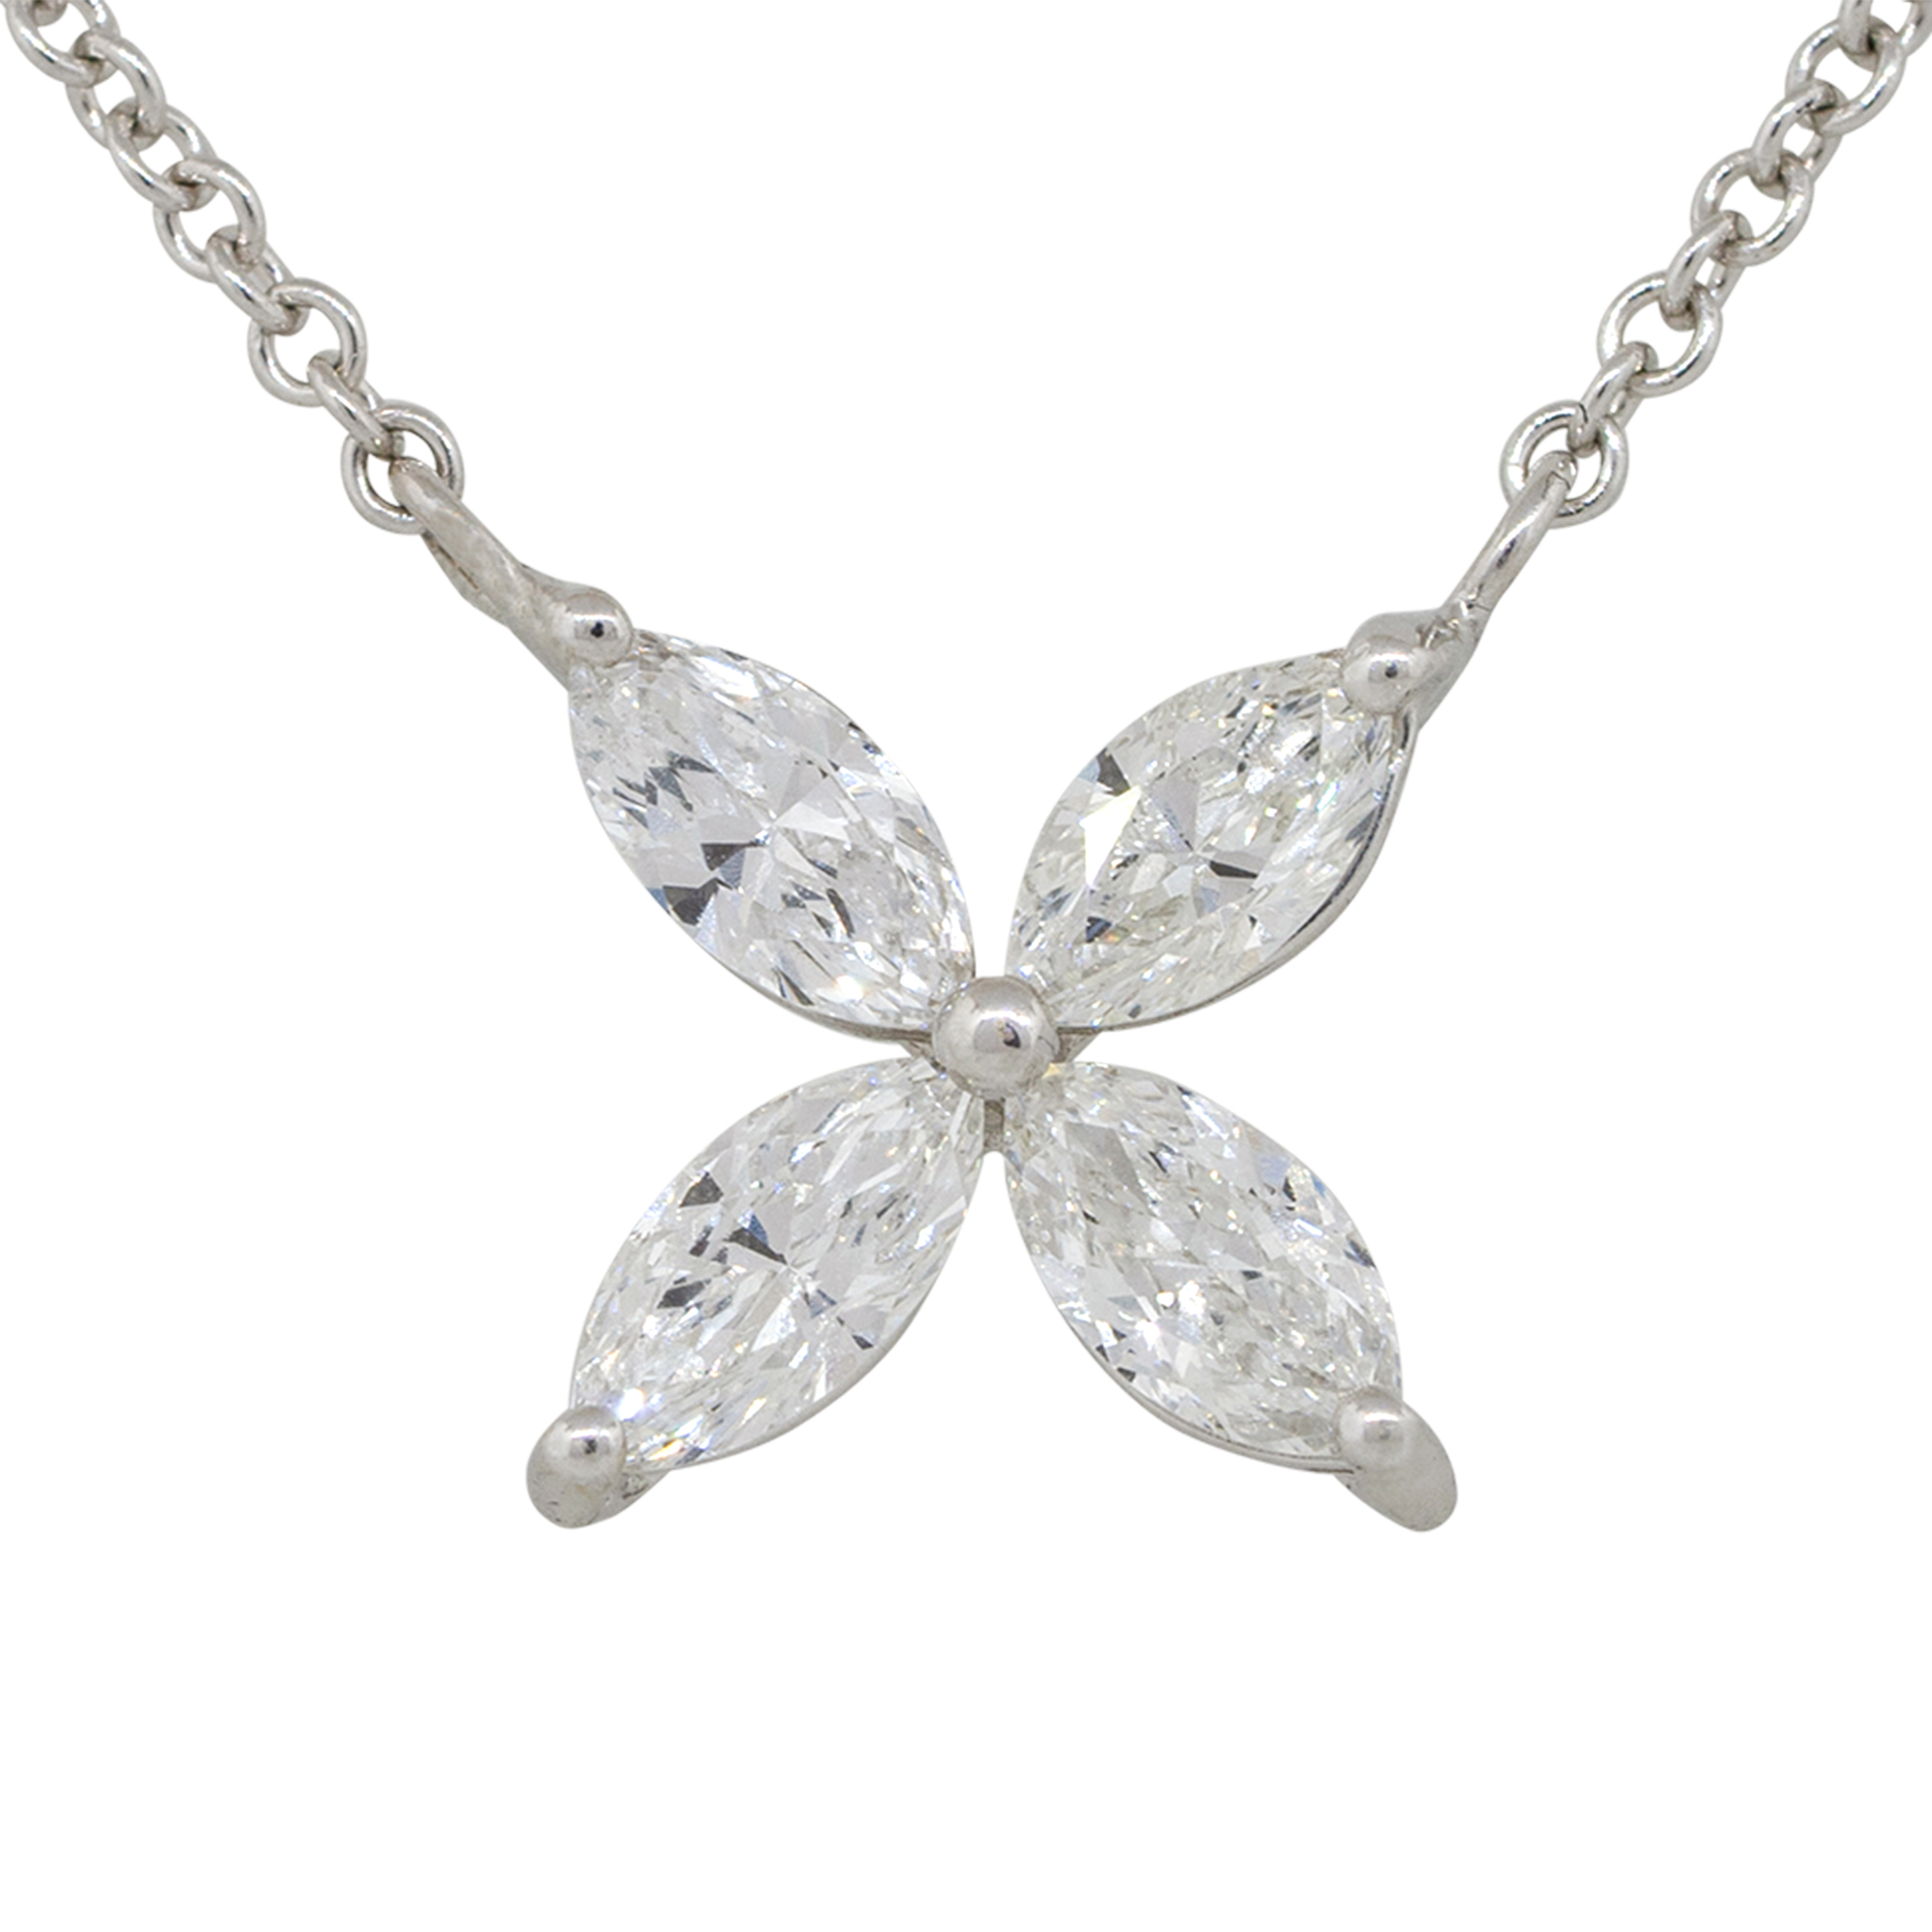 White Gold and Diamond Blossom Pendant Necklace